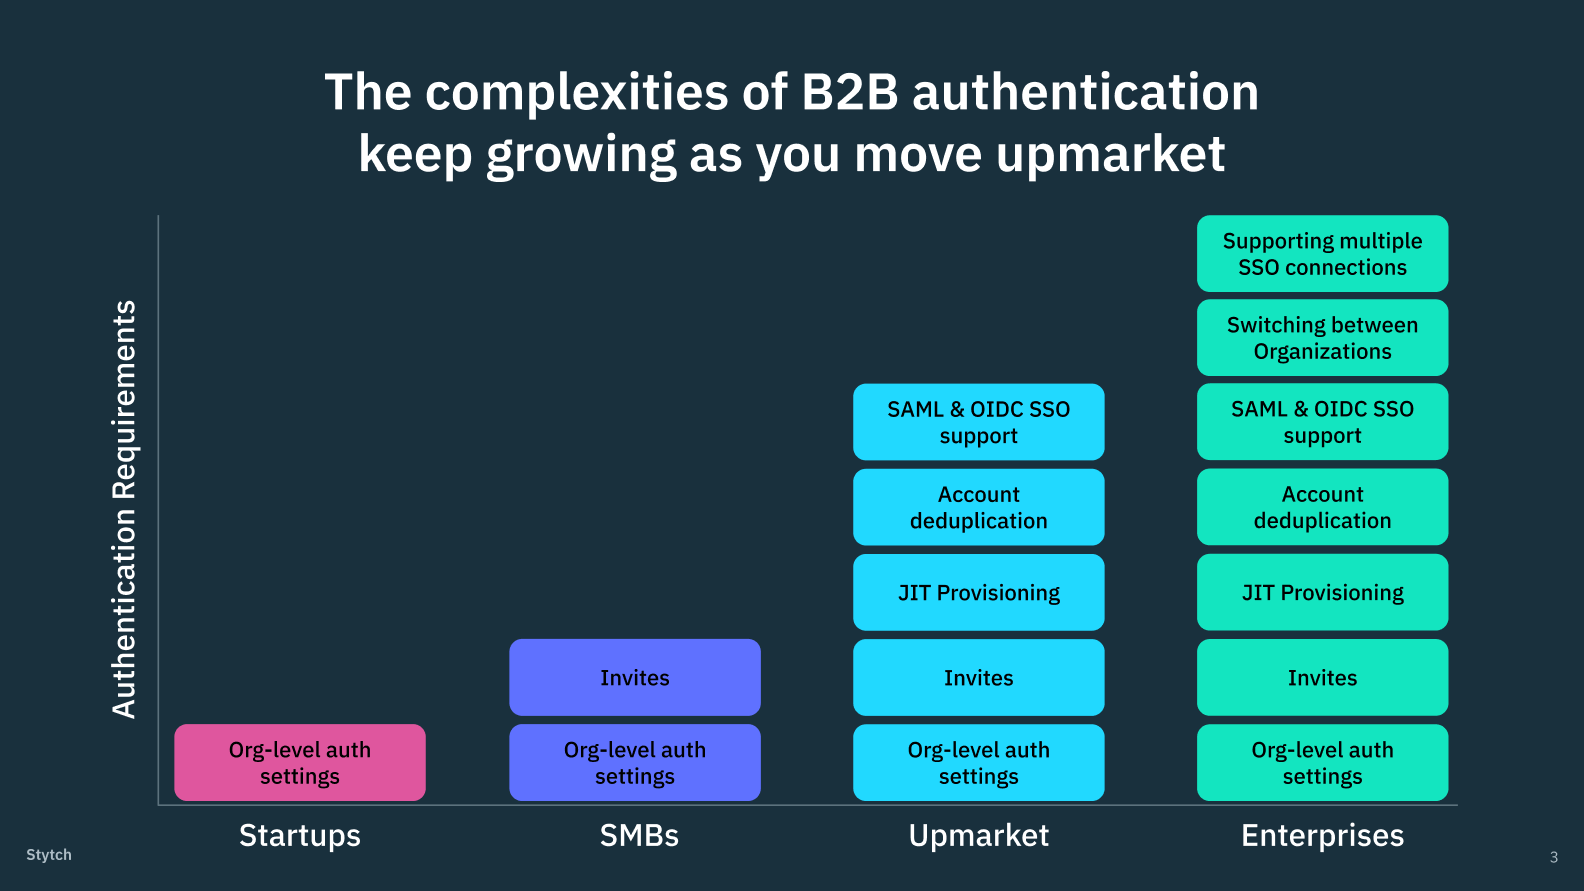 A slide that says "The complexities of B2B authentication keep growing as you move upmarket" with a graph showing how much more complex the demands on a B2B app become as they move towards enterprise clients